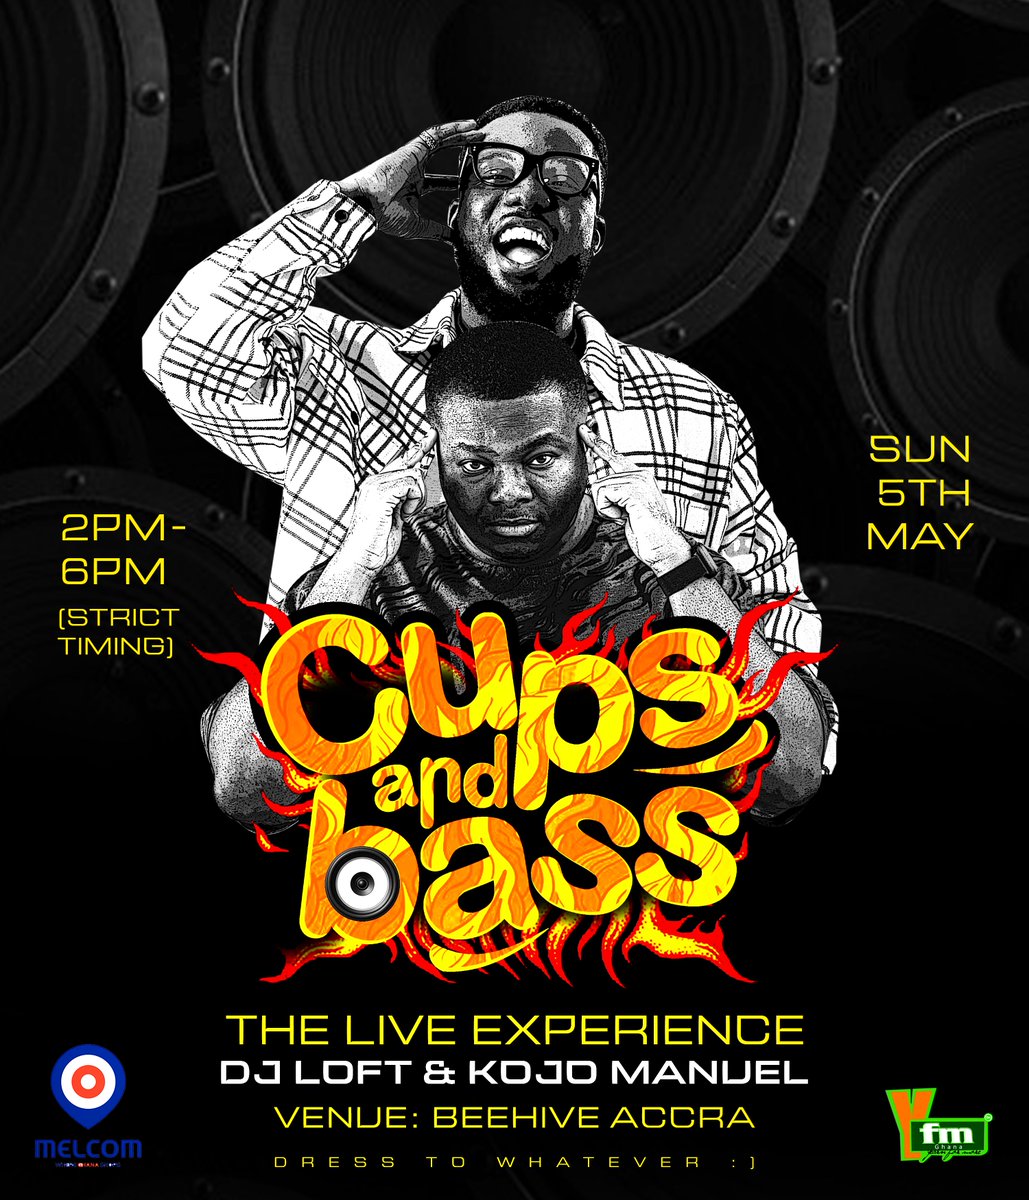 We (@deejayLoft X @KojoManuel) present CUPS & BASS 🔥 The Live Experience This Sunday Beehive Accra 2pm to 6pm(very strict timing)